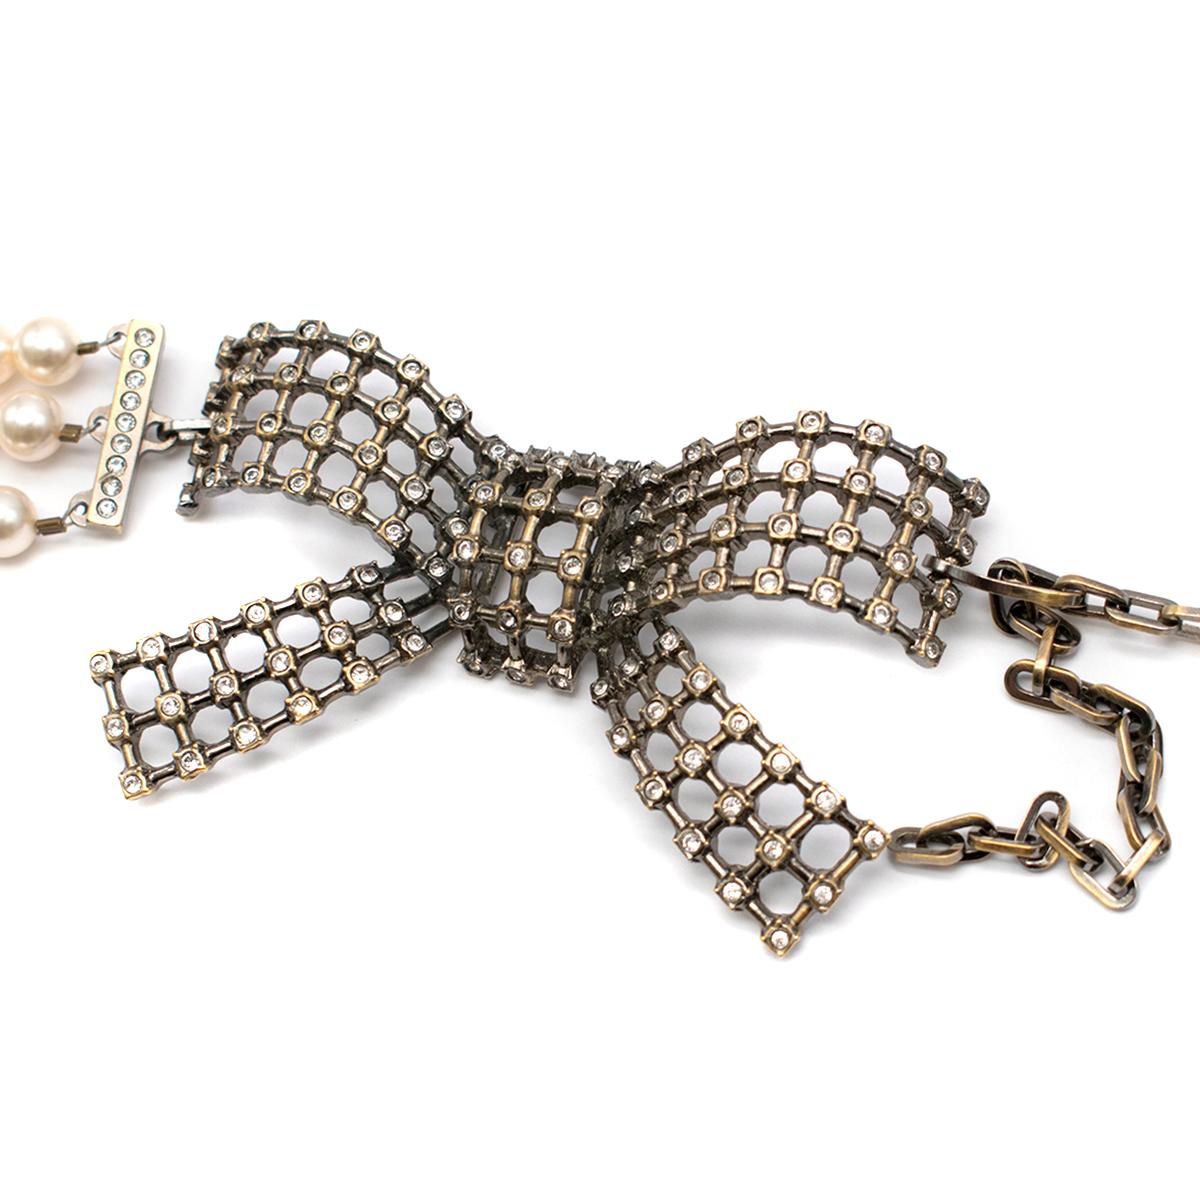 Valentino Faux Pearl Mesh Bow Buckle Belt

- faux pearl belt 
- three levels 
- metal bow detail to the front embellished with crystals
- hook adjustable fastening to the bow part

This item comes with the original dust bag.

Please note, these